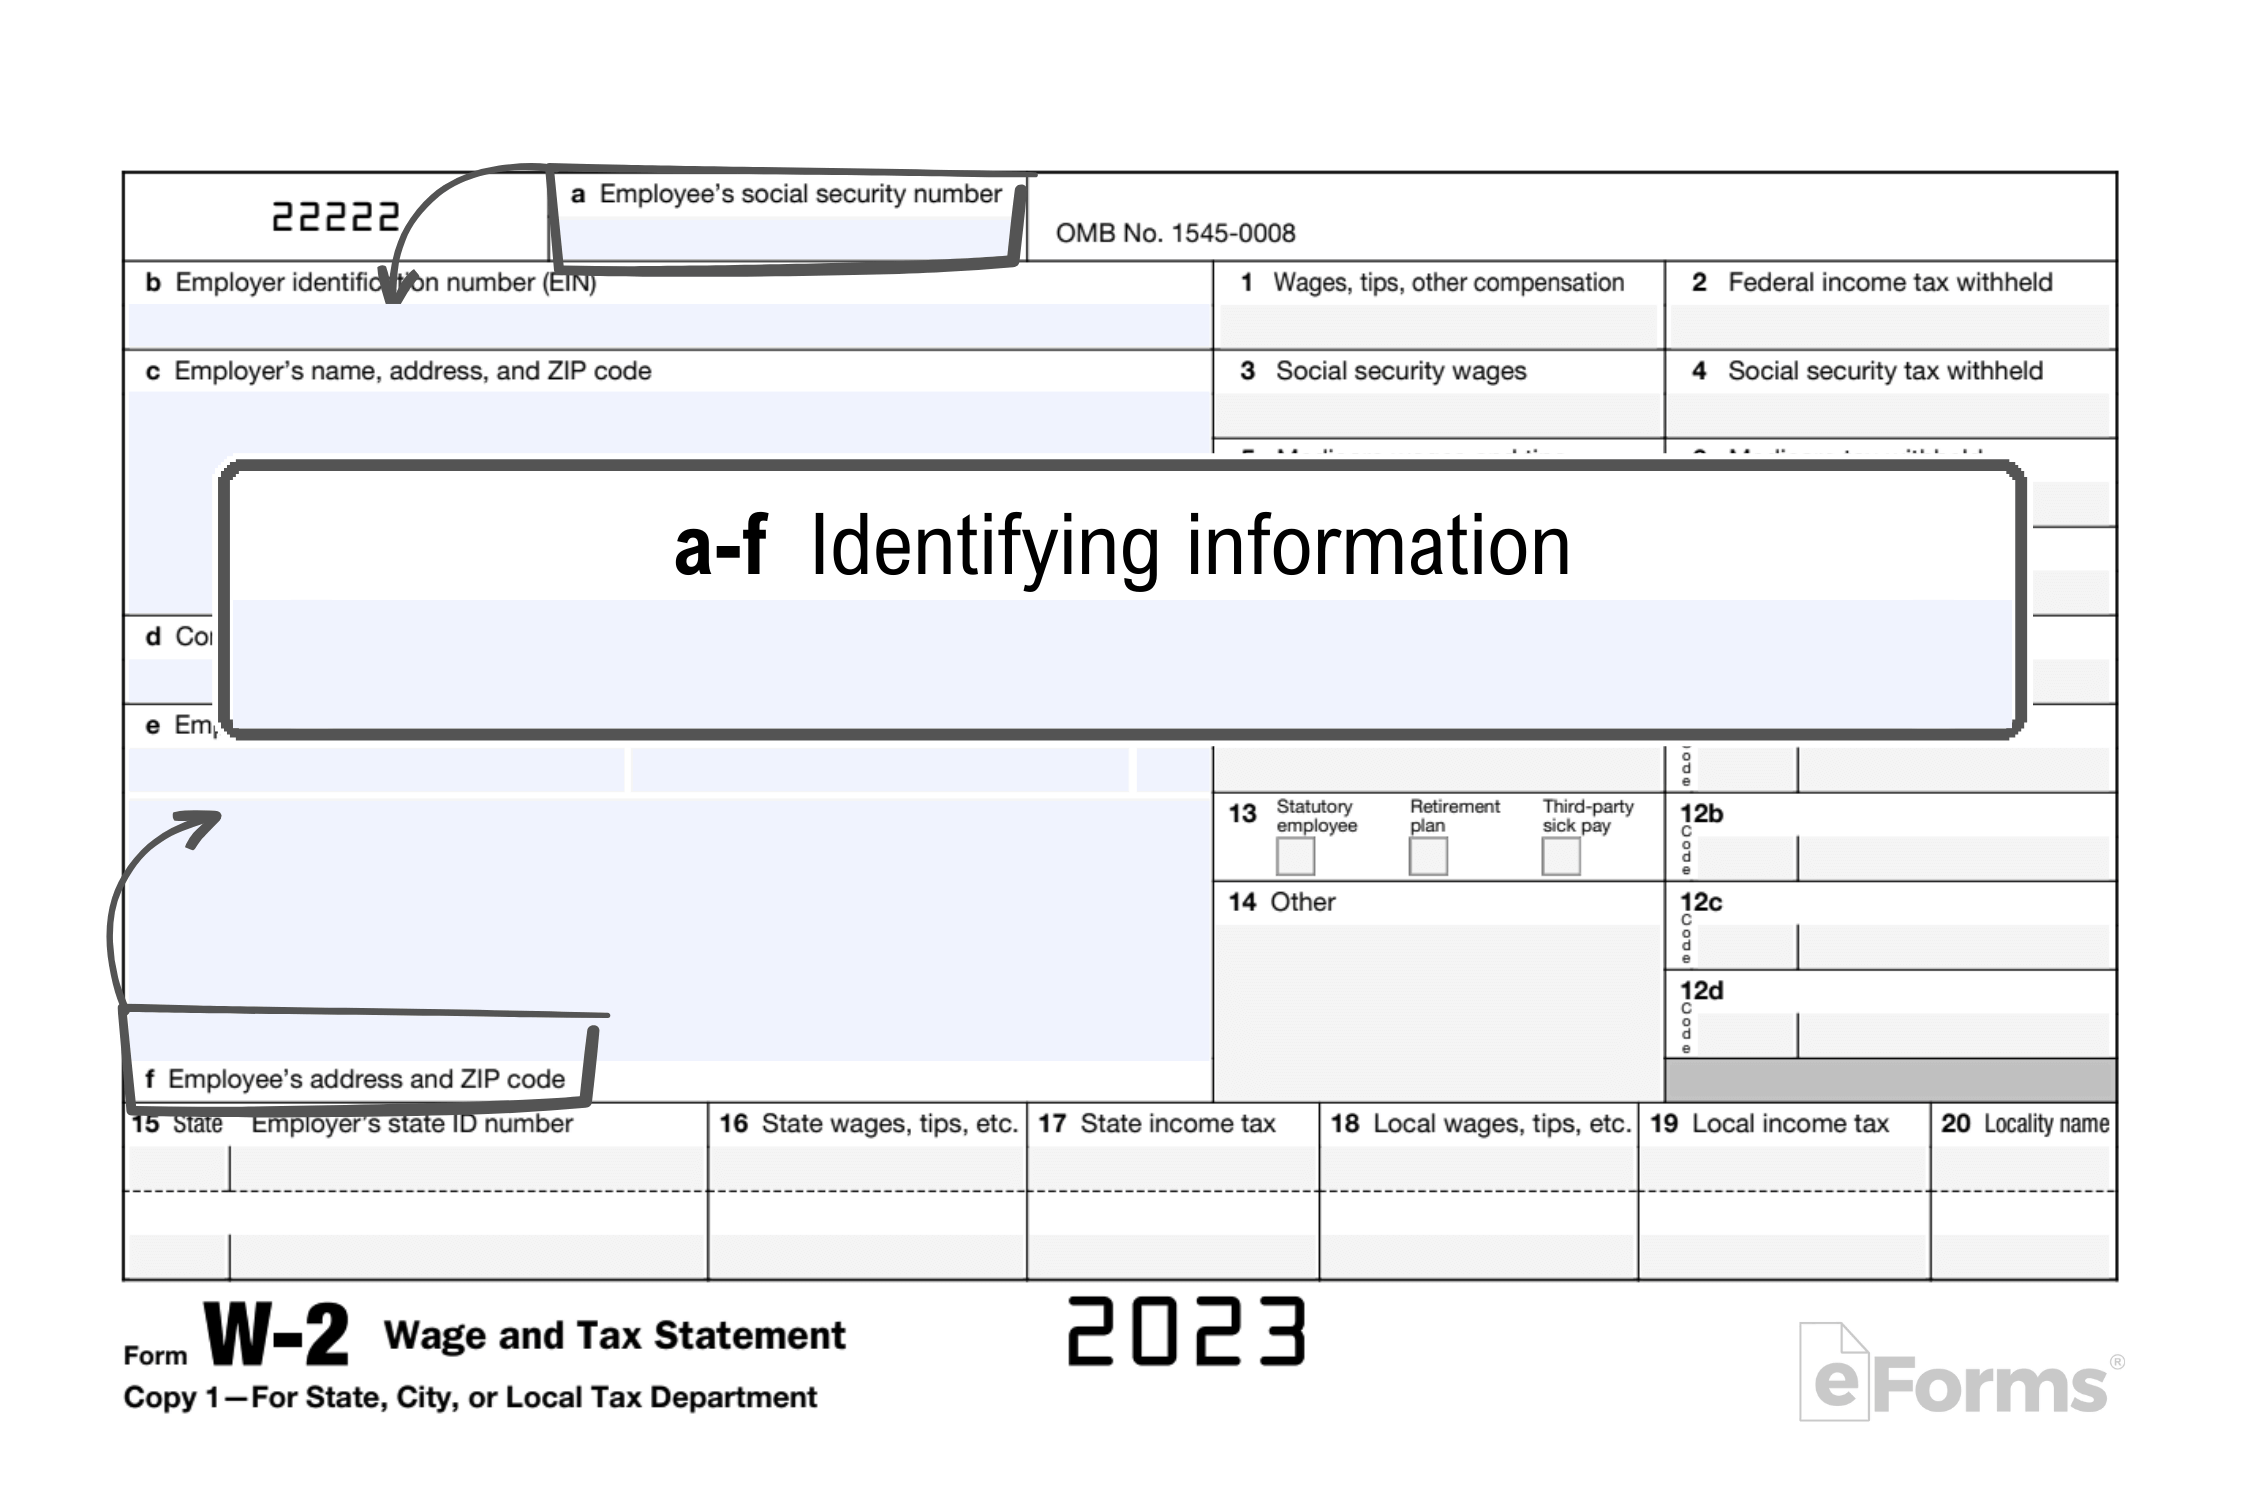 Free Irs Form W-2 | Wage And Tax Statement - Pdf – Eforms regarding Download W2 Forms